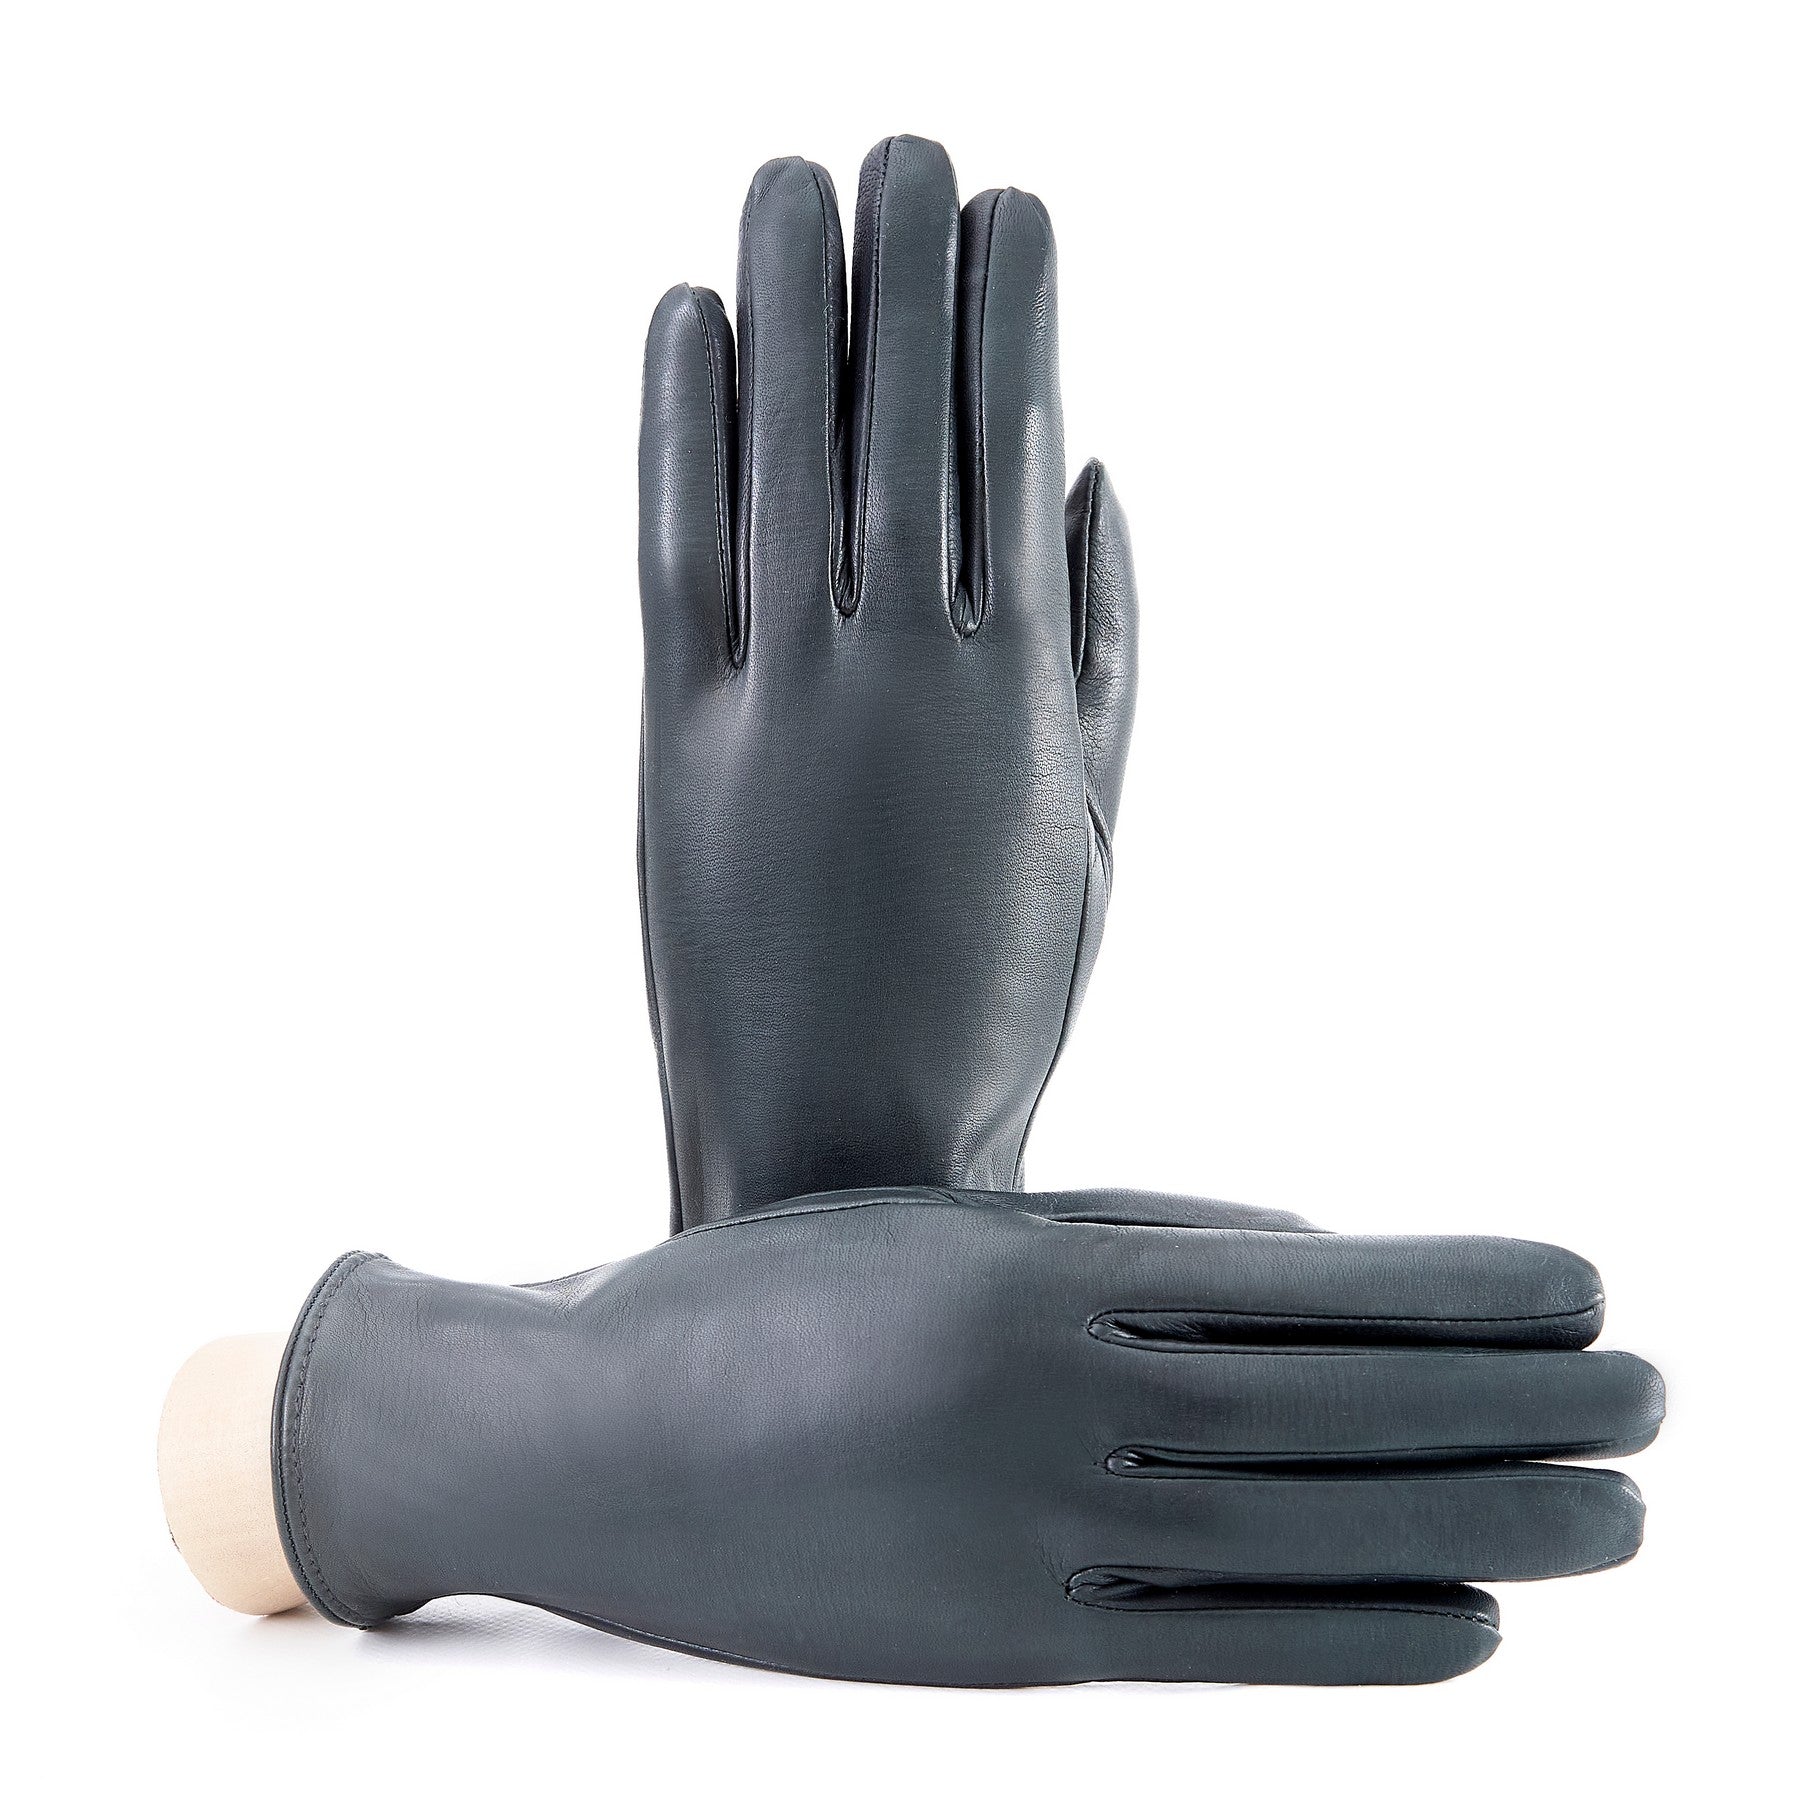 Women’s basic forest green soft nappa leather gloves with palm opening and mix cashmere lining